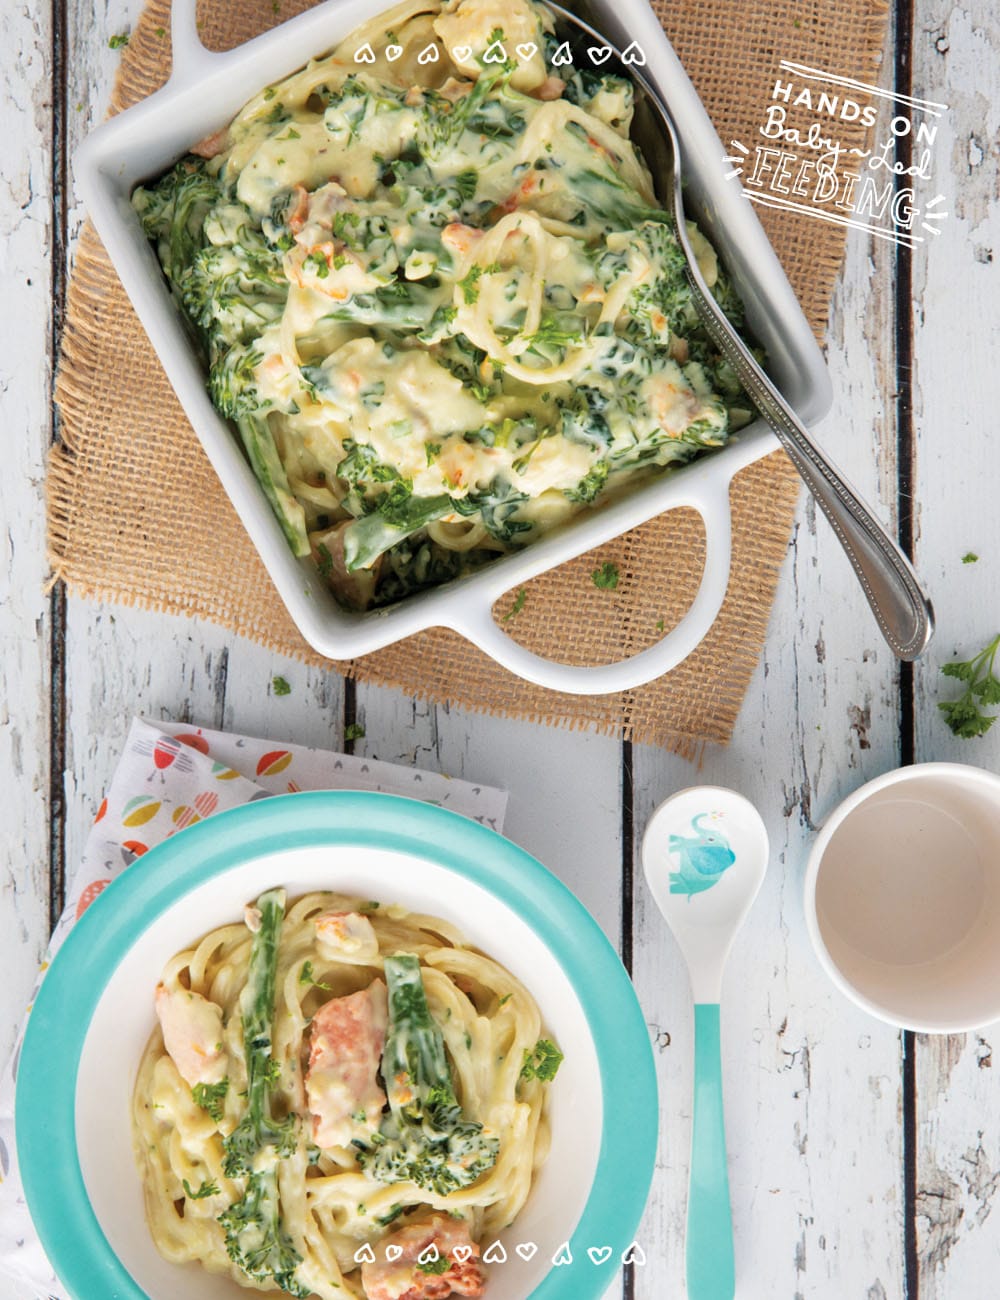 Baby Led Weaning friendly creamy seafood pasta with crushed garlic, Irish cream, tenderstem broccoli, and kale. An easy healthy recipe for the entire family that is loaded with Omega 3s, vitamin C, A, and K! #babyledweaning #babyledfeeding #pasta #seafood #seafoodpasta #familyfood